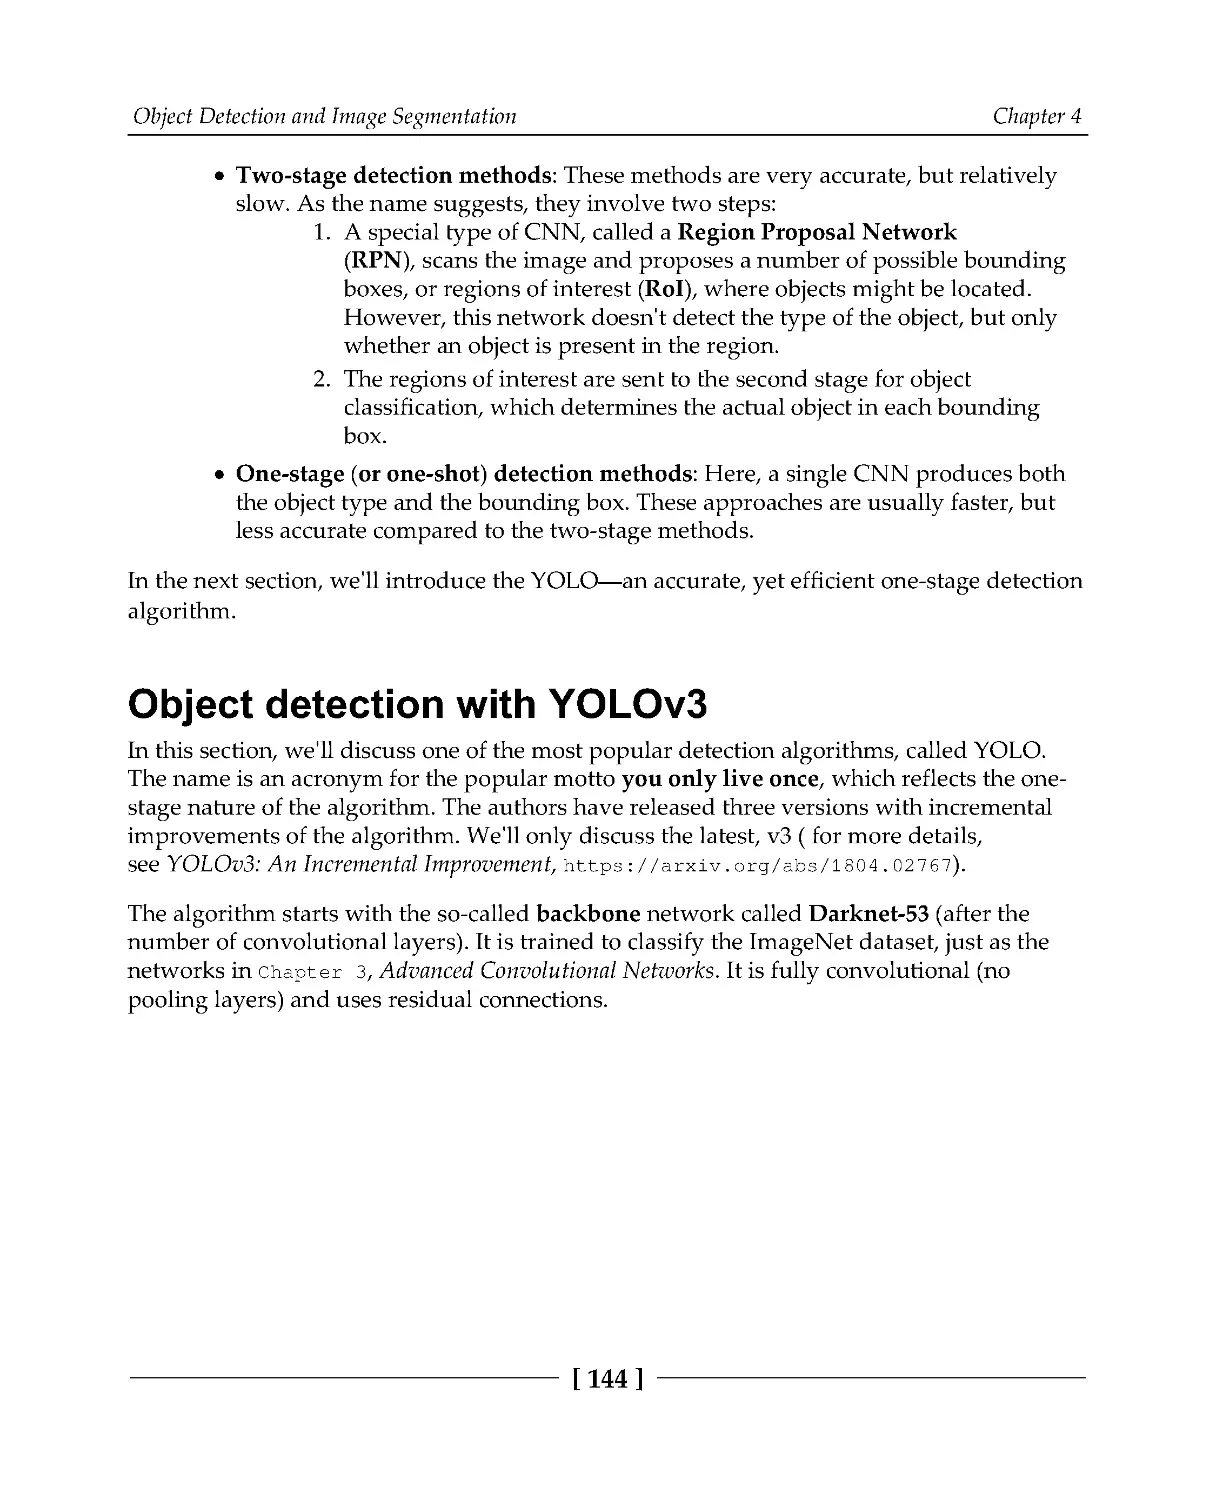 Object detection with YOLOv3